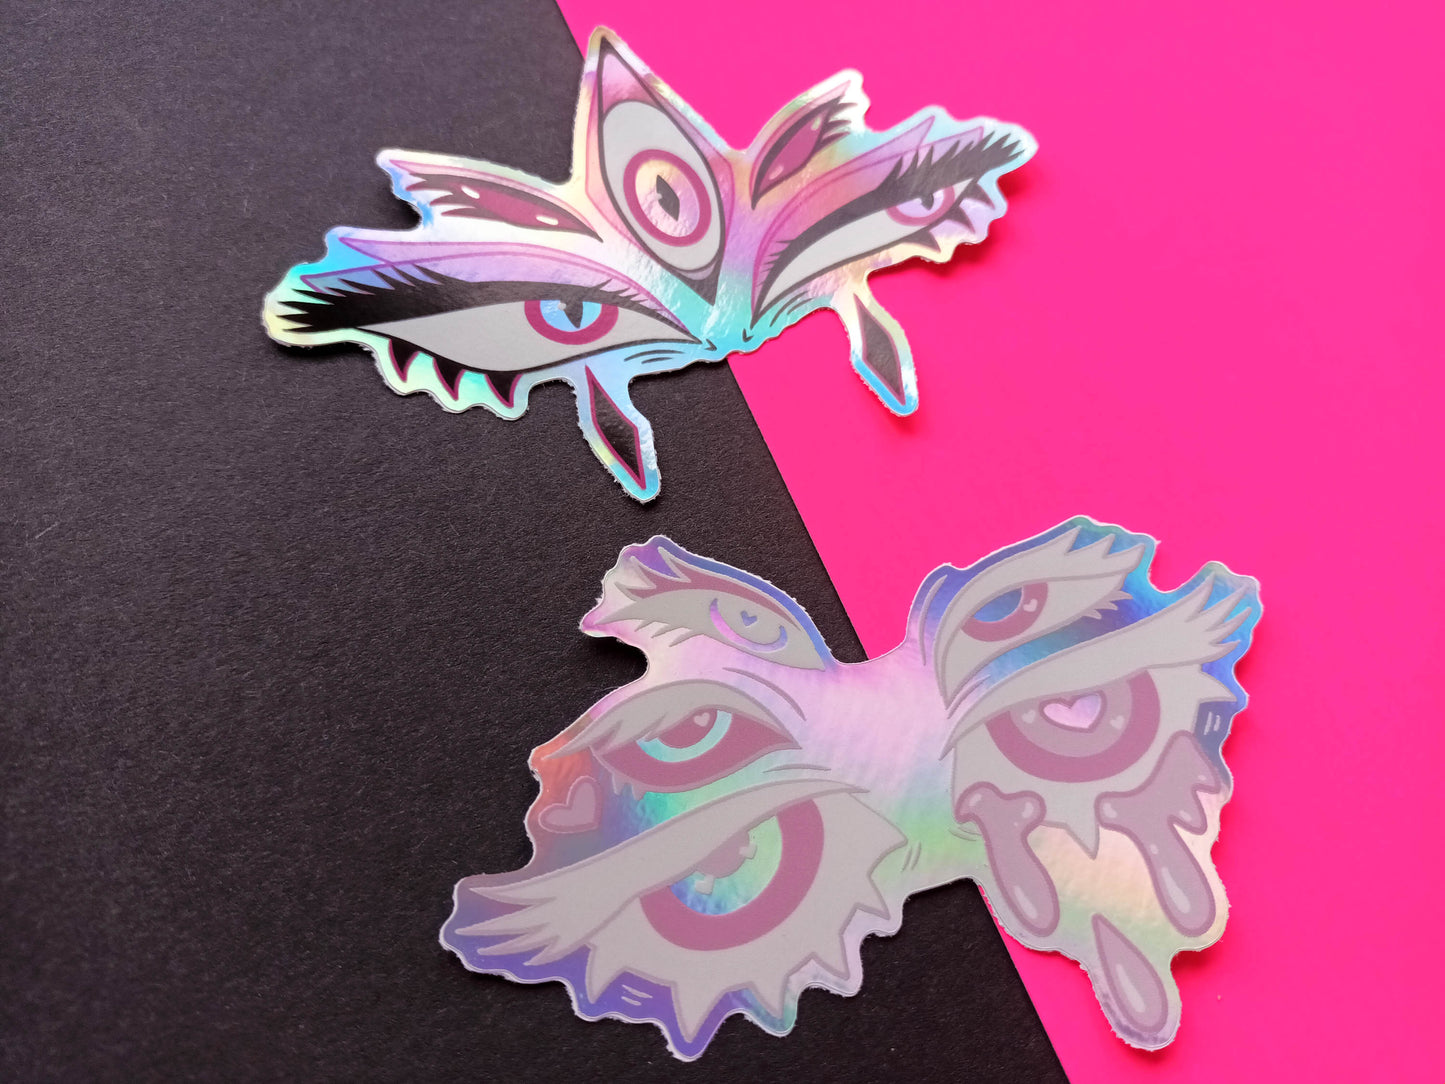 Holographic Vinyl Angel and Devil Eyes Stickers